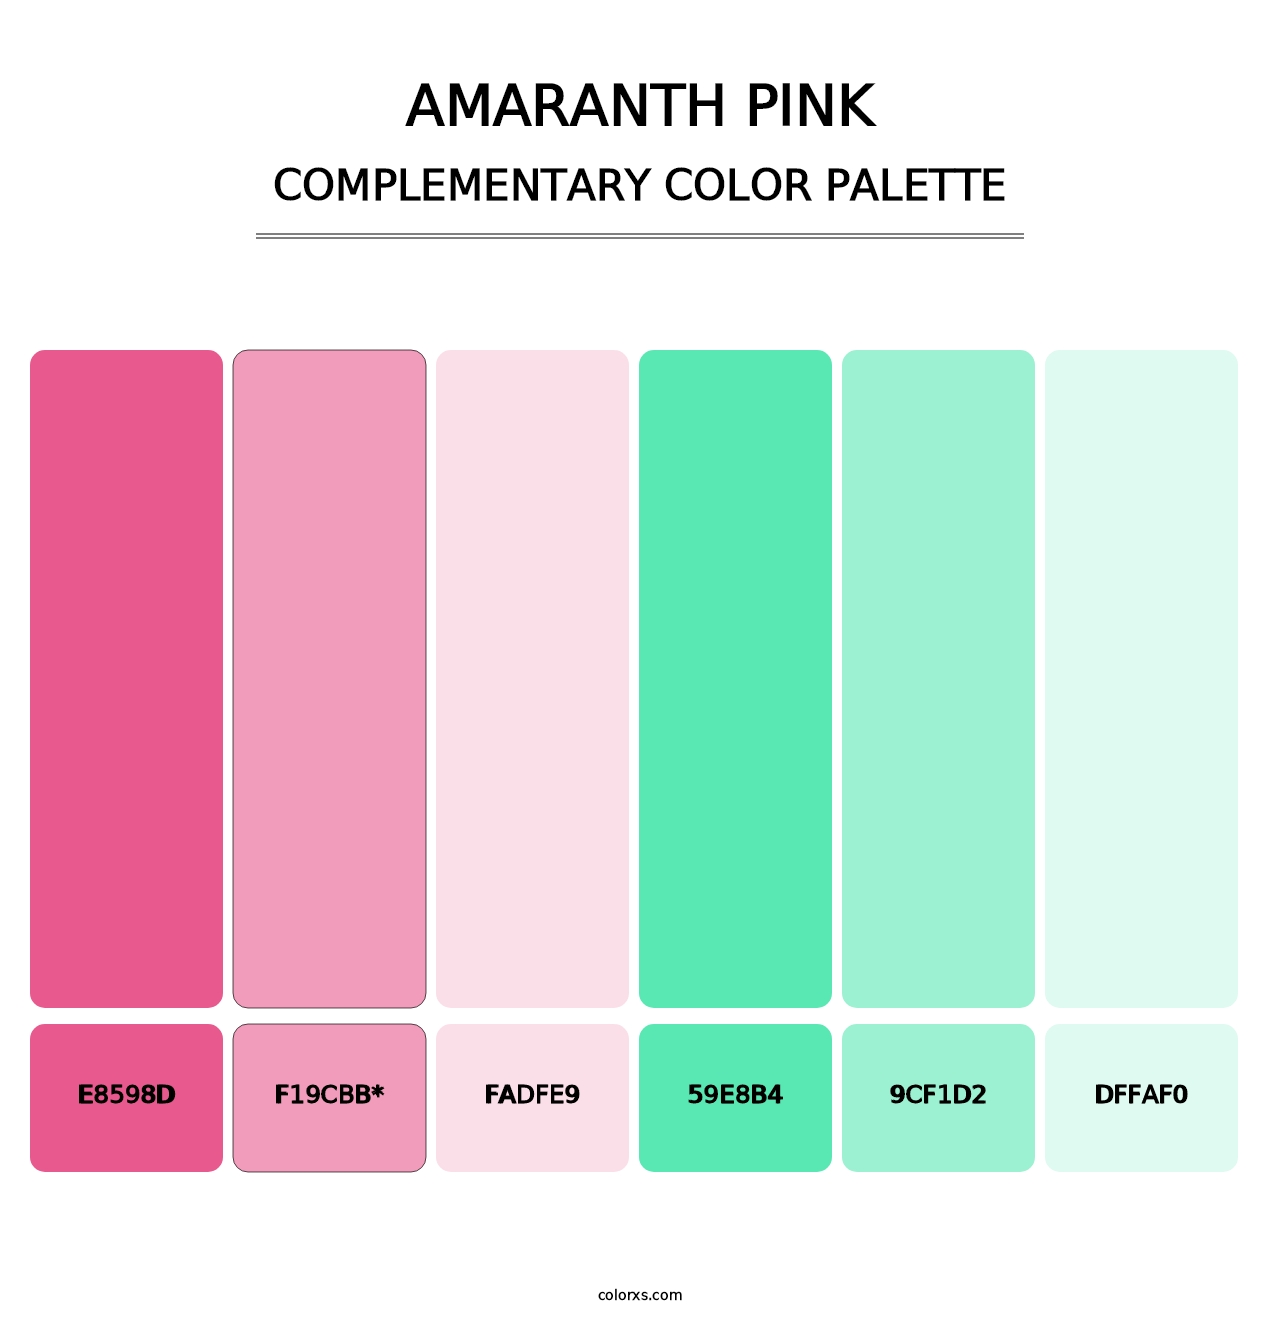 Amaranth Pink - Complementary Color Palette